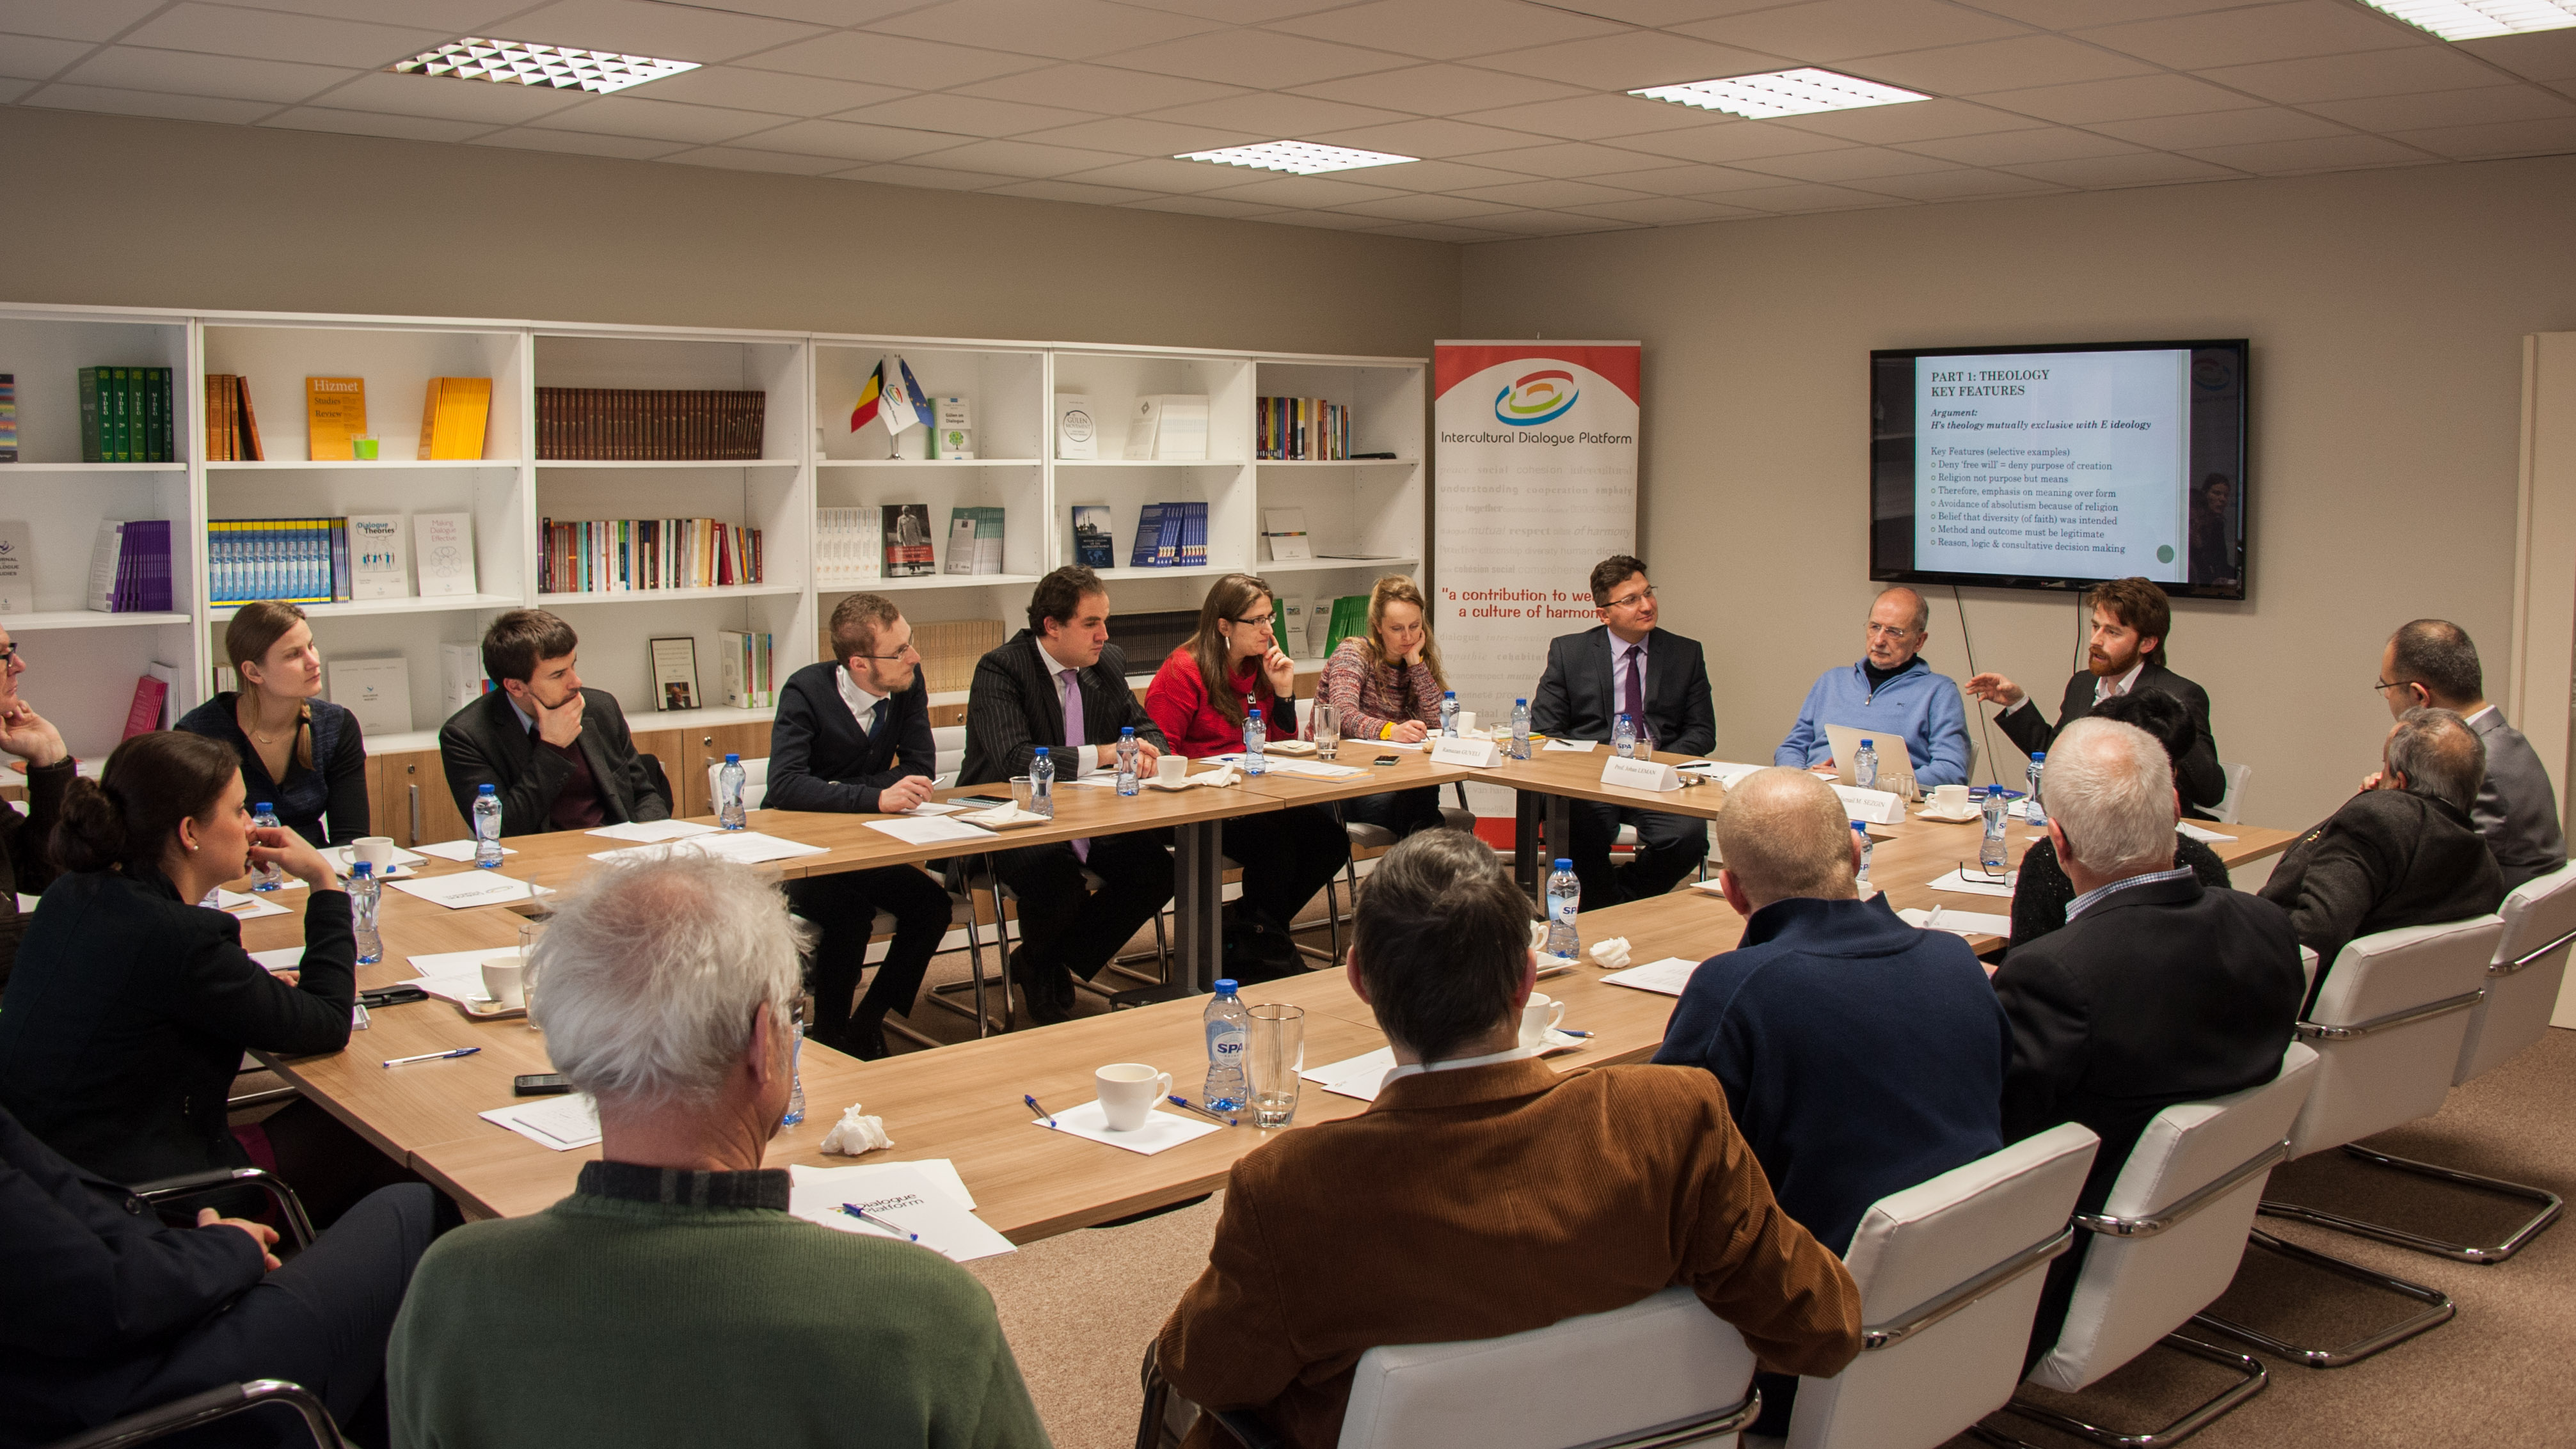 Roundtable Lunch Discussion “Hizmet Movement on Extremism”